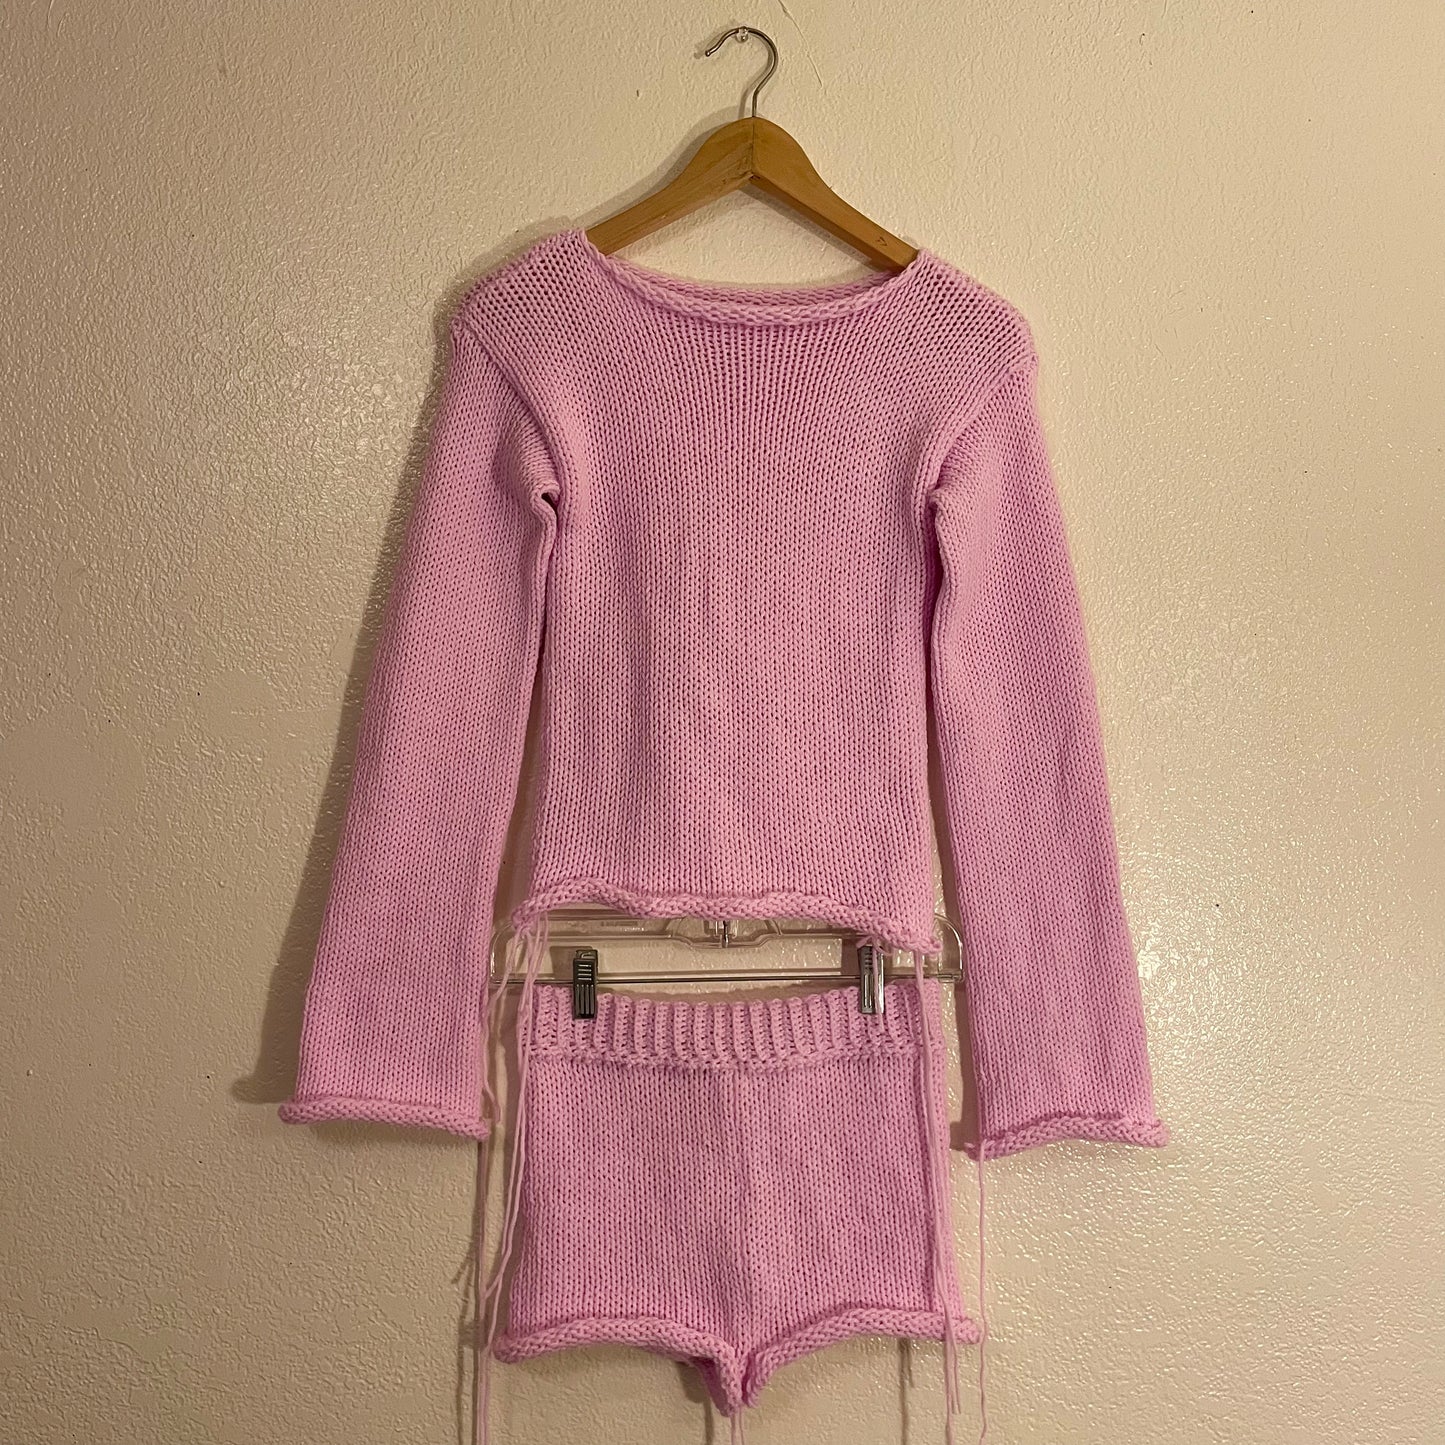 Light pink knitted long sleeve top with matching booty shorts